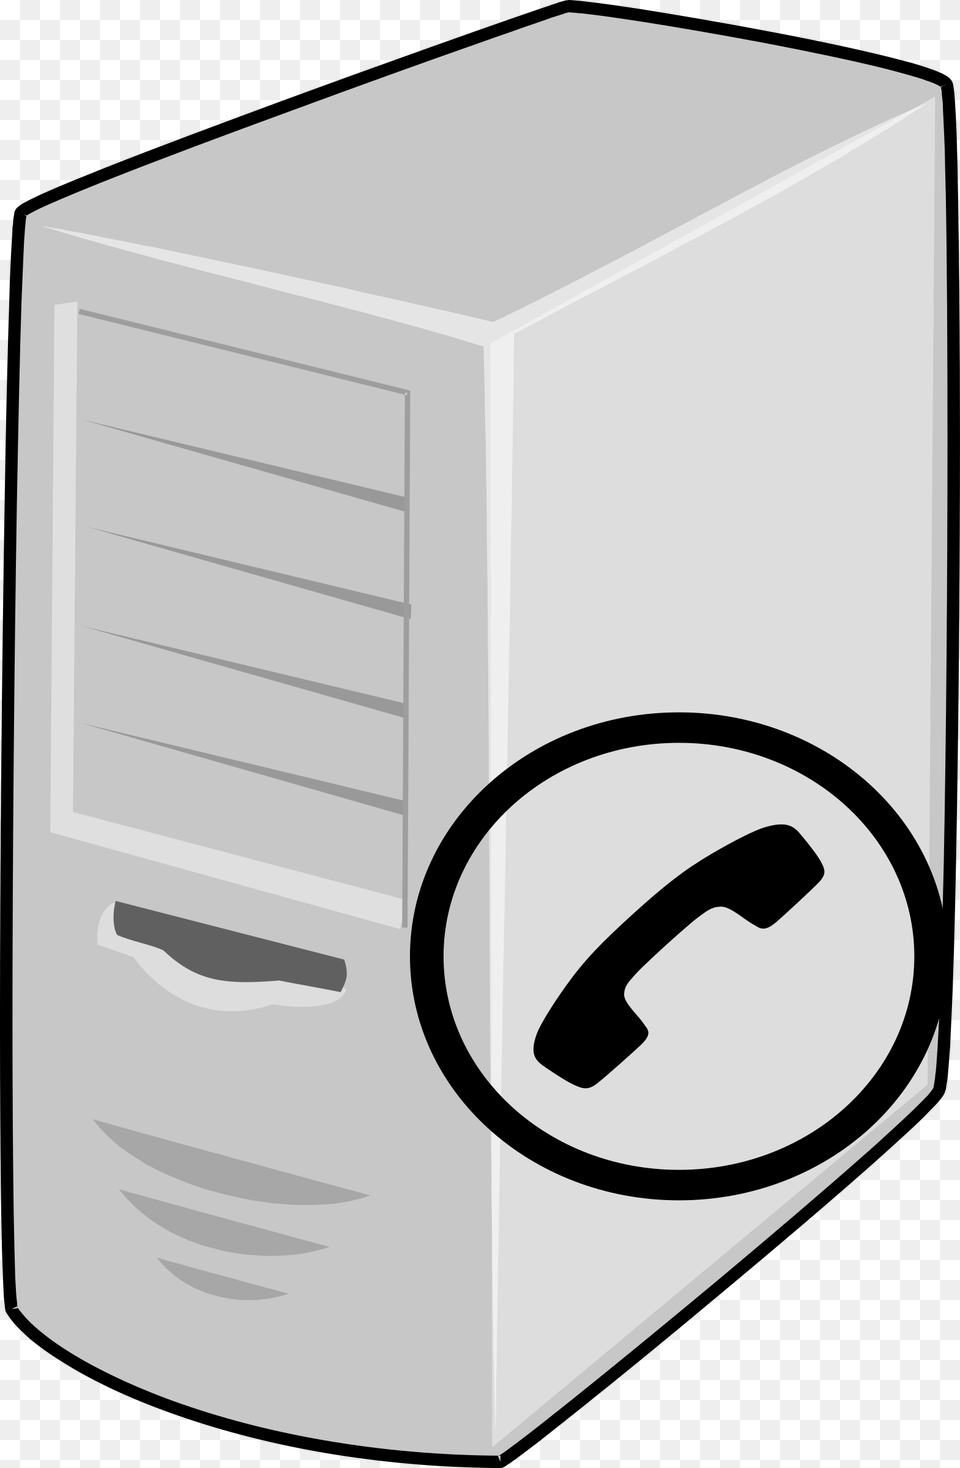 This Icons Design Of Voip Server, Computer Hardware, Electronics, Hardware, Computer Free Png